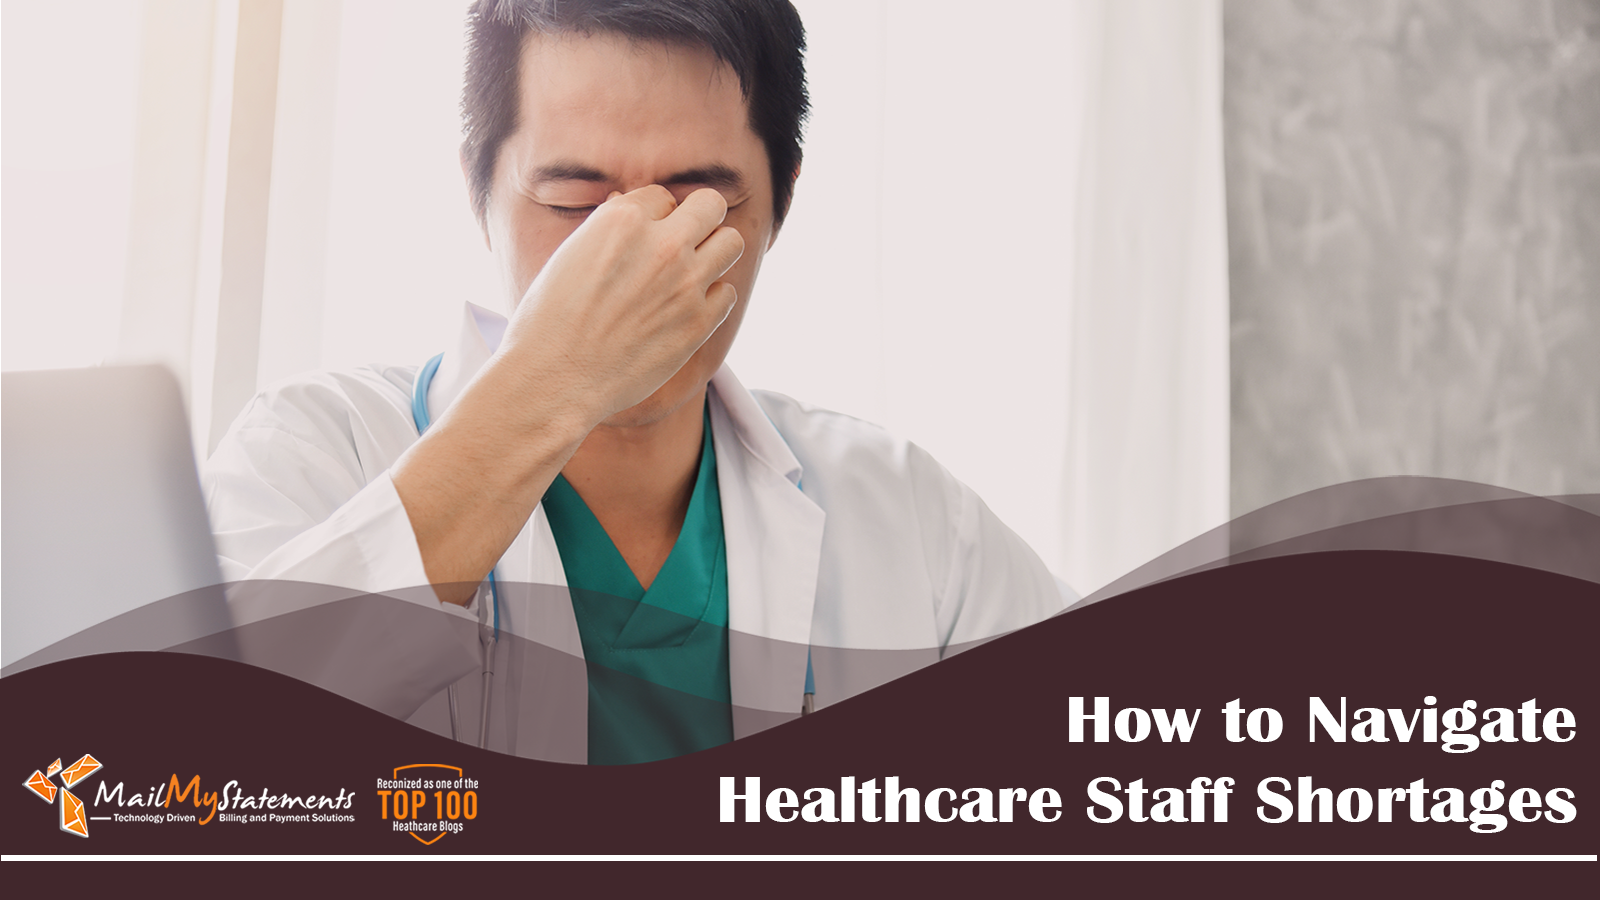 How to Navigate Healthcare Staff Shortages